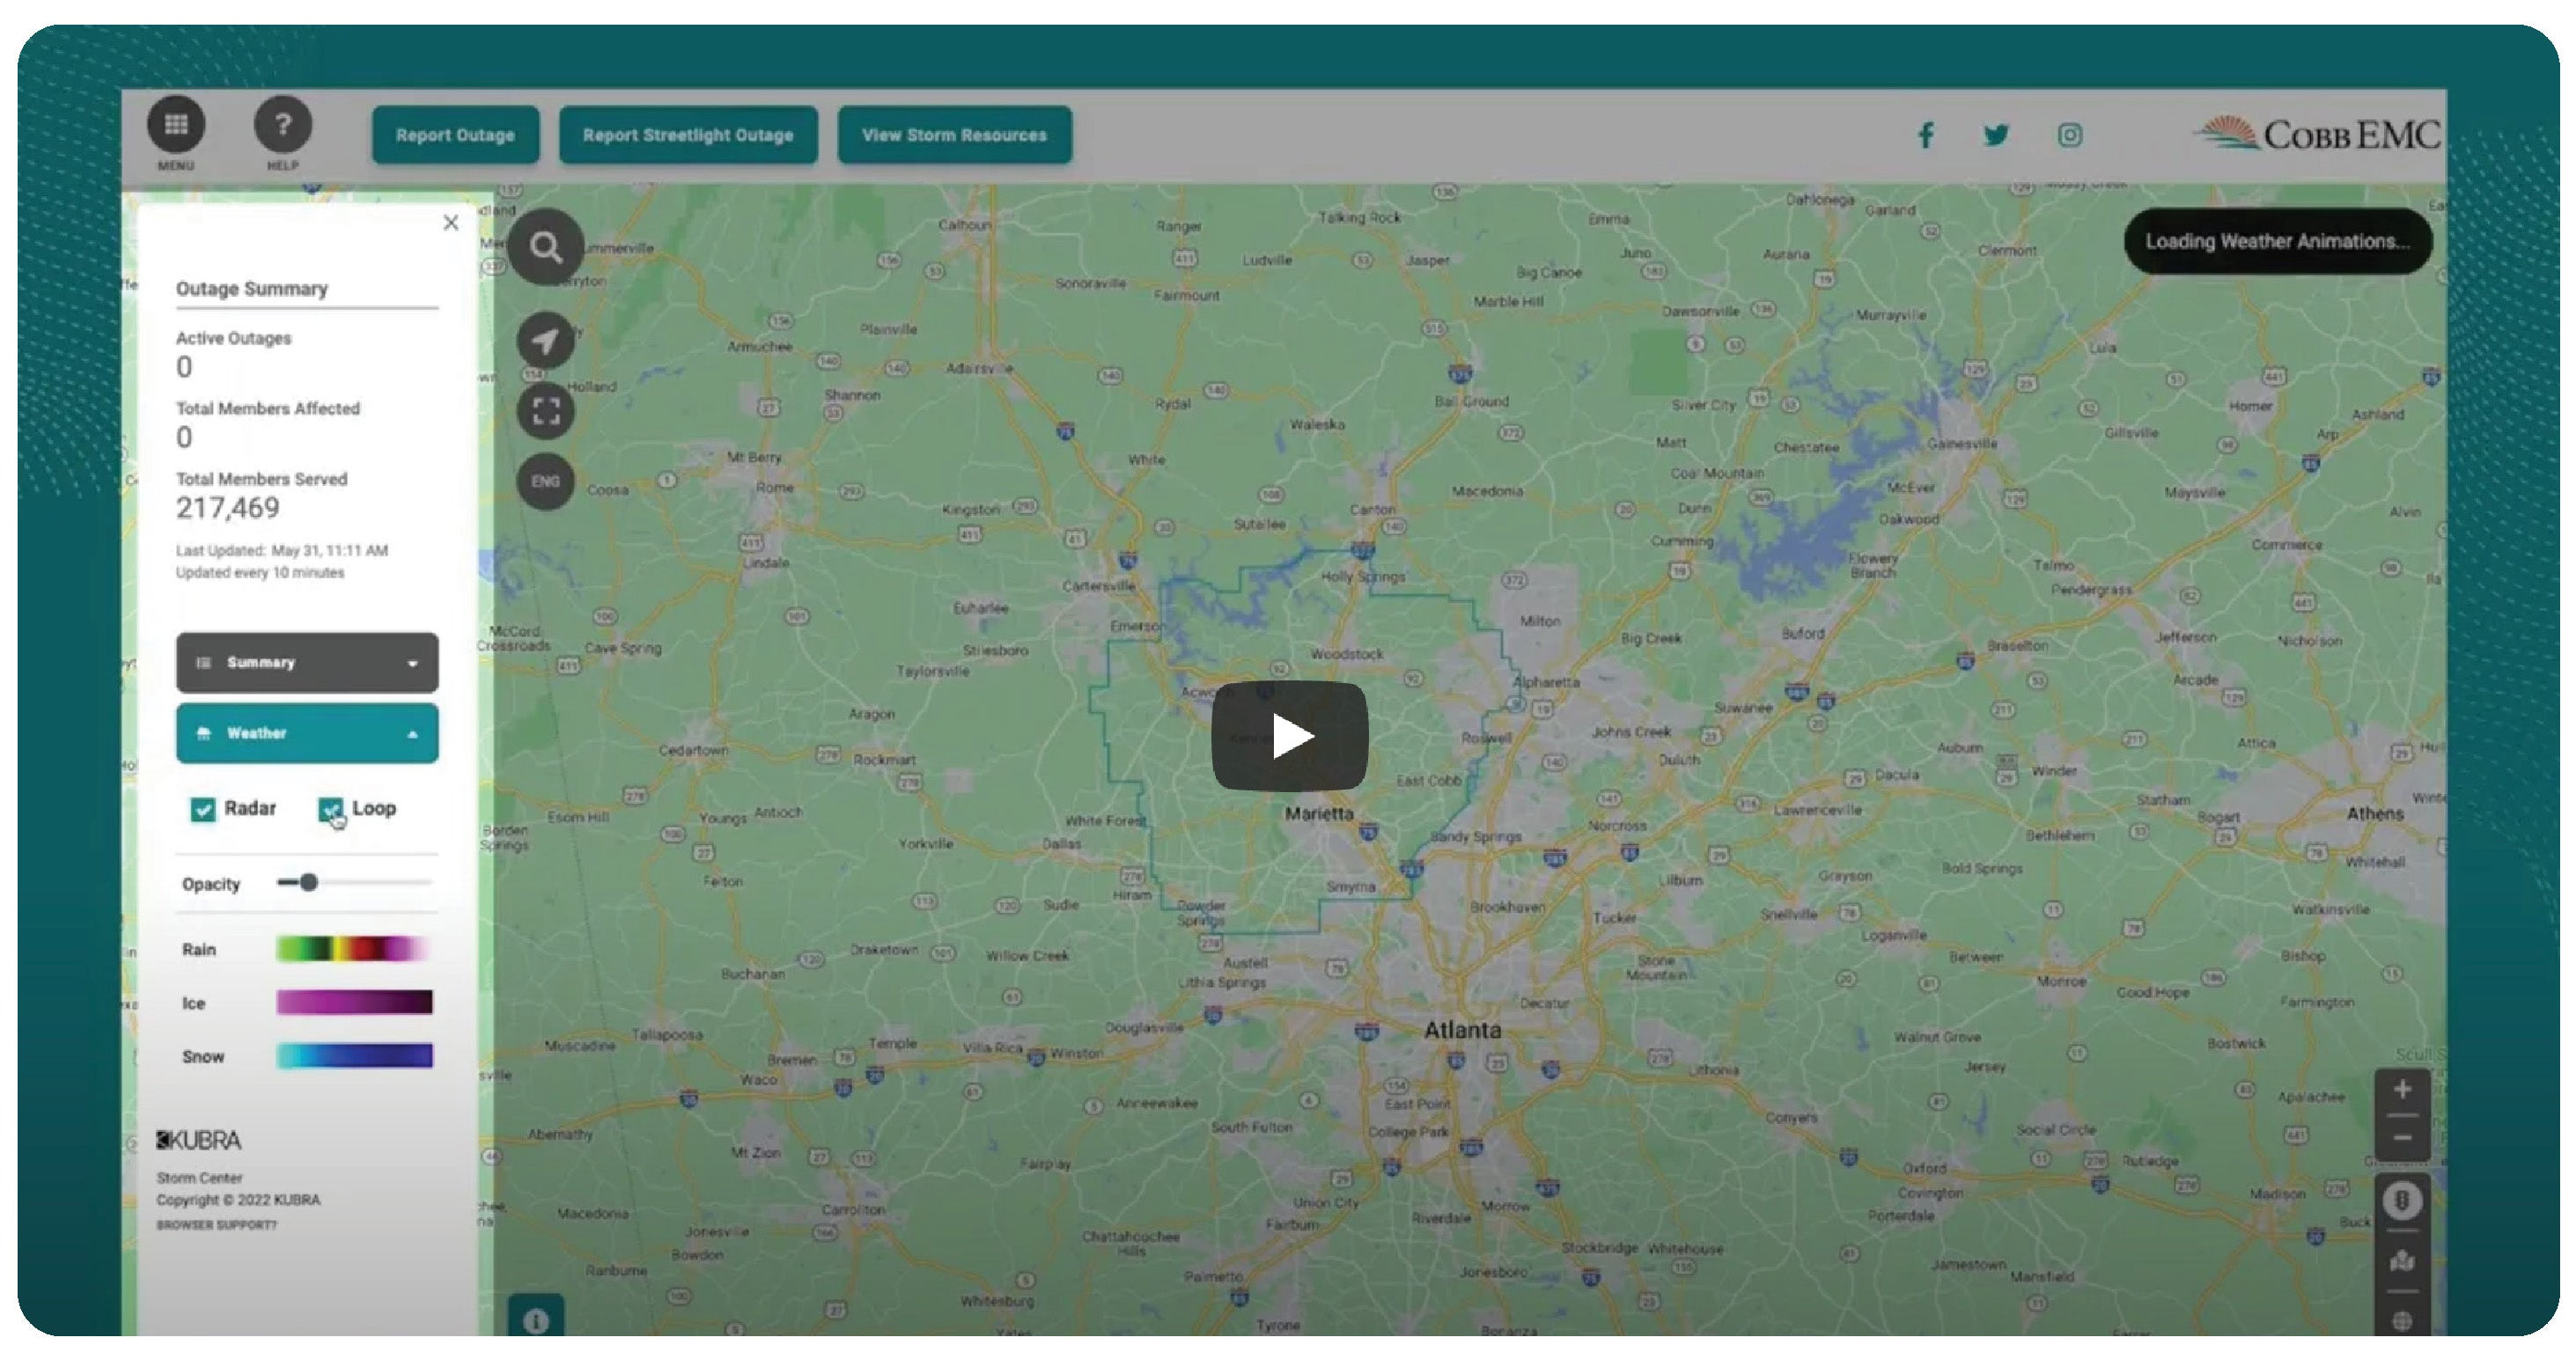 Outage Map How-To Videos